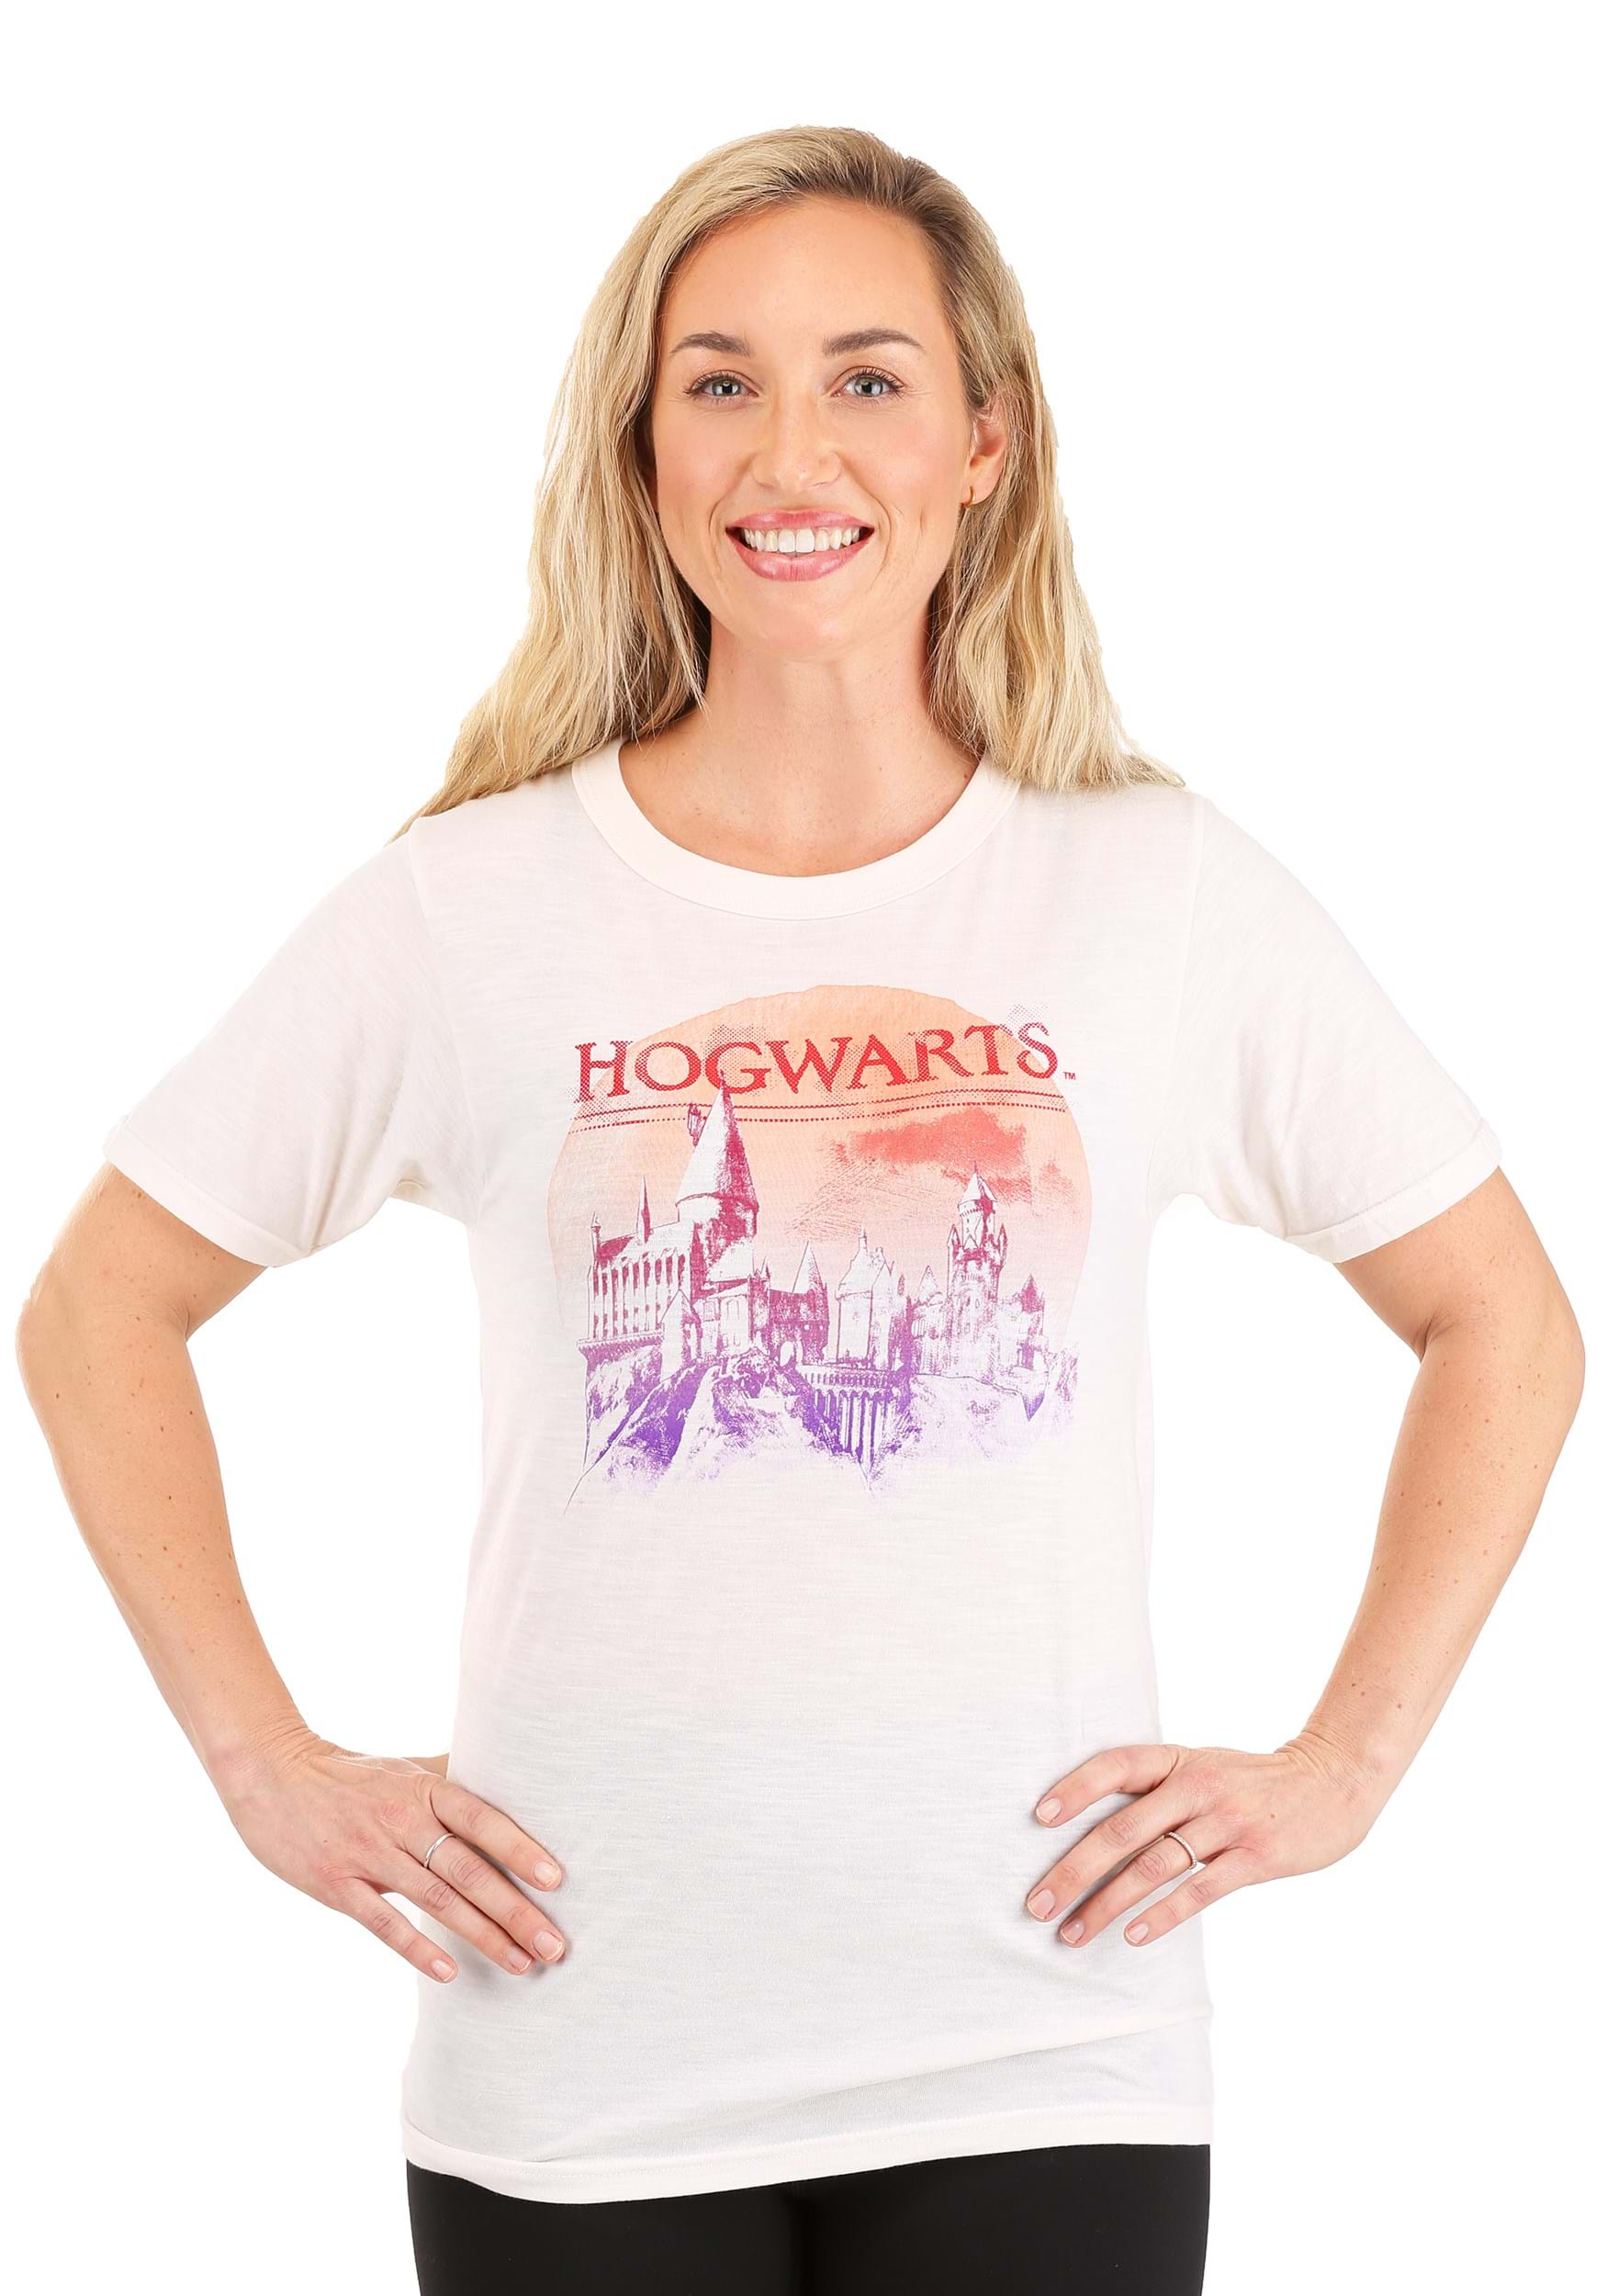 Harry Potter Red Moon Hogwarts T-Shirt for Adults